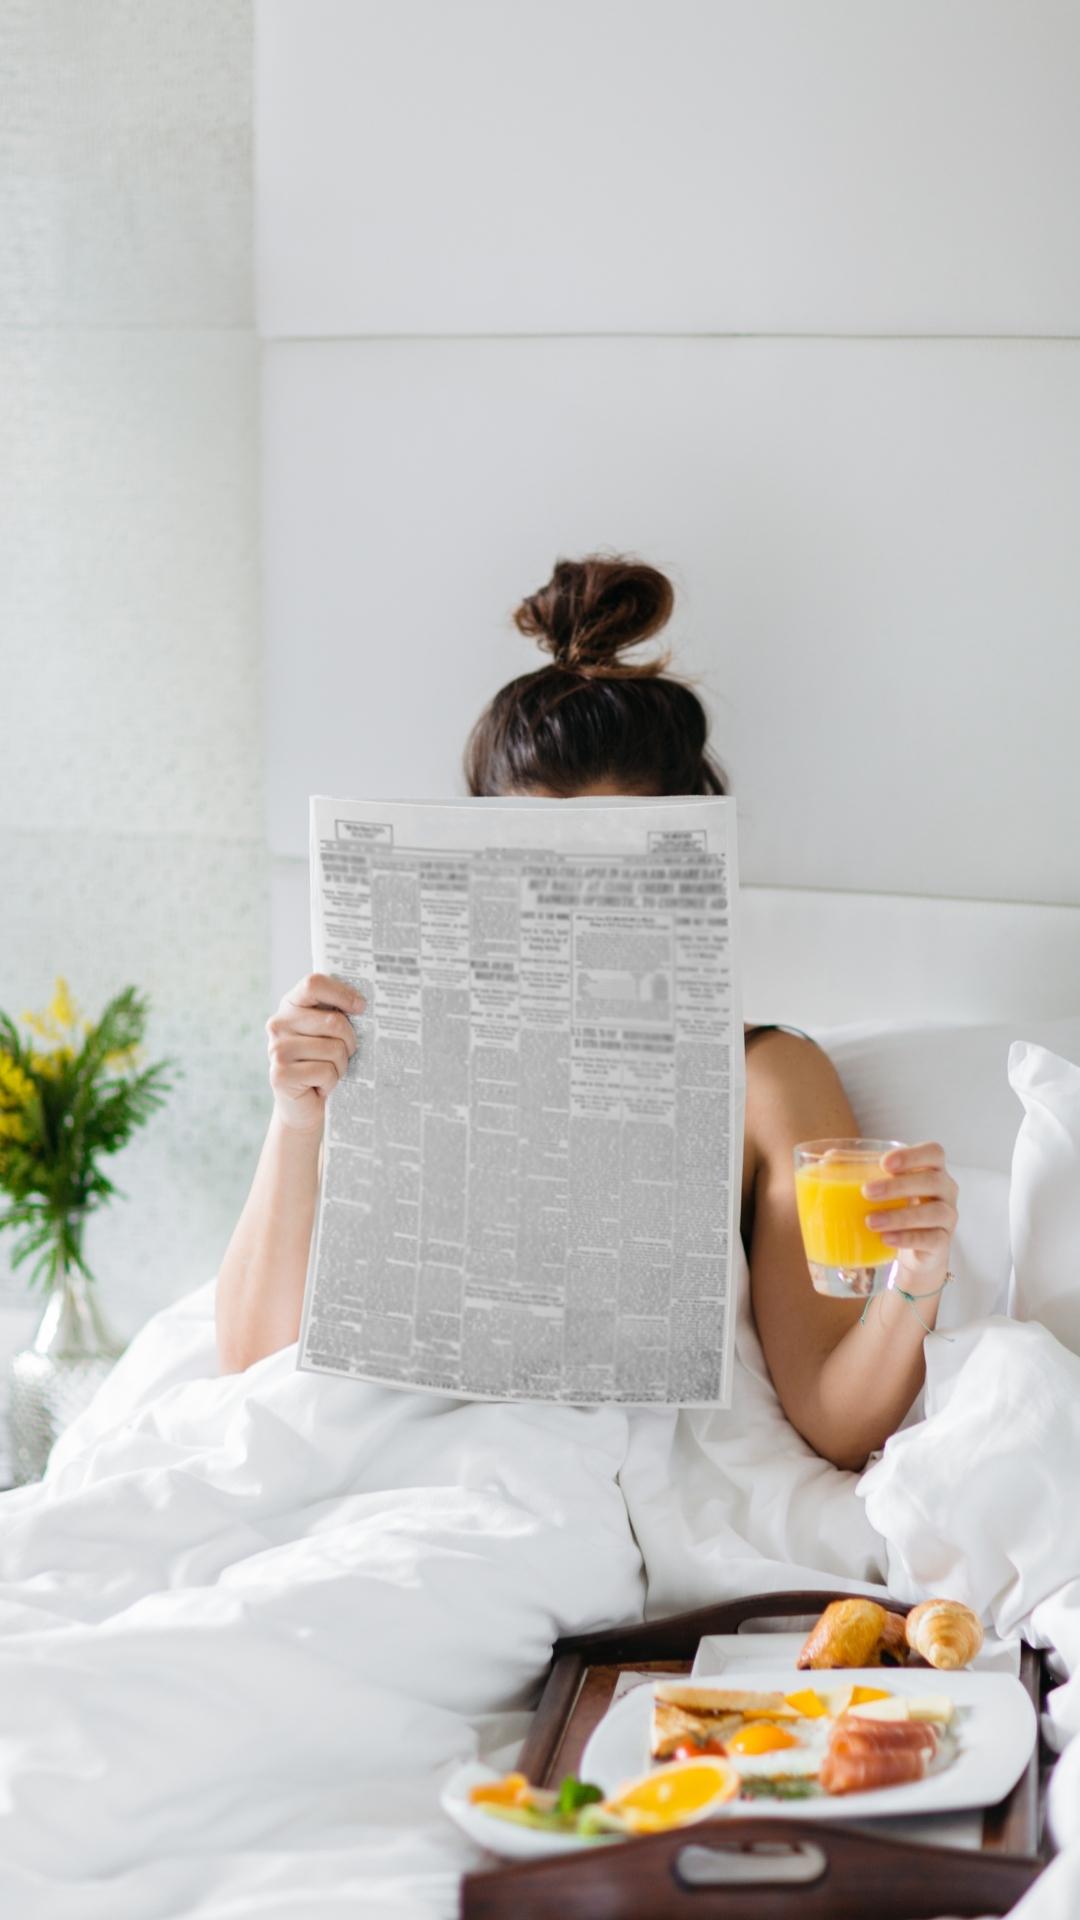 5 morning ritual that will change your life forever